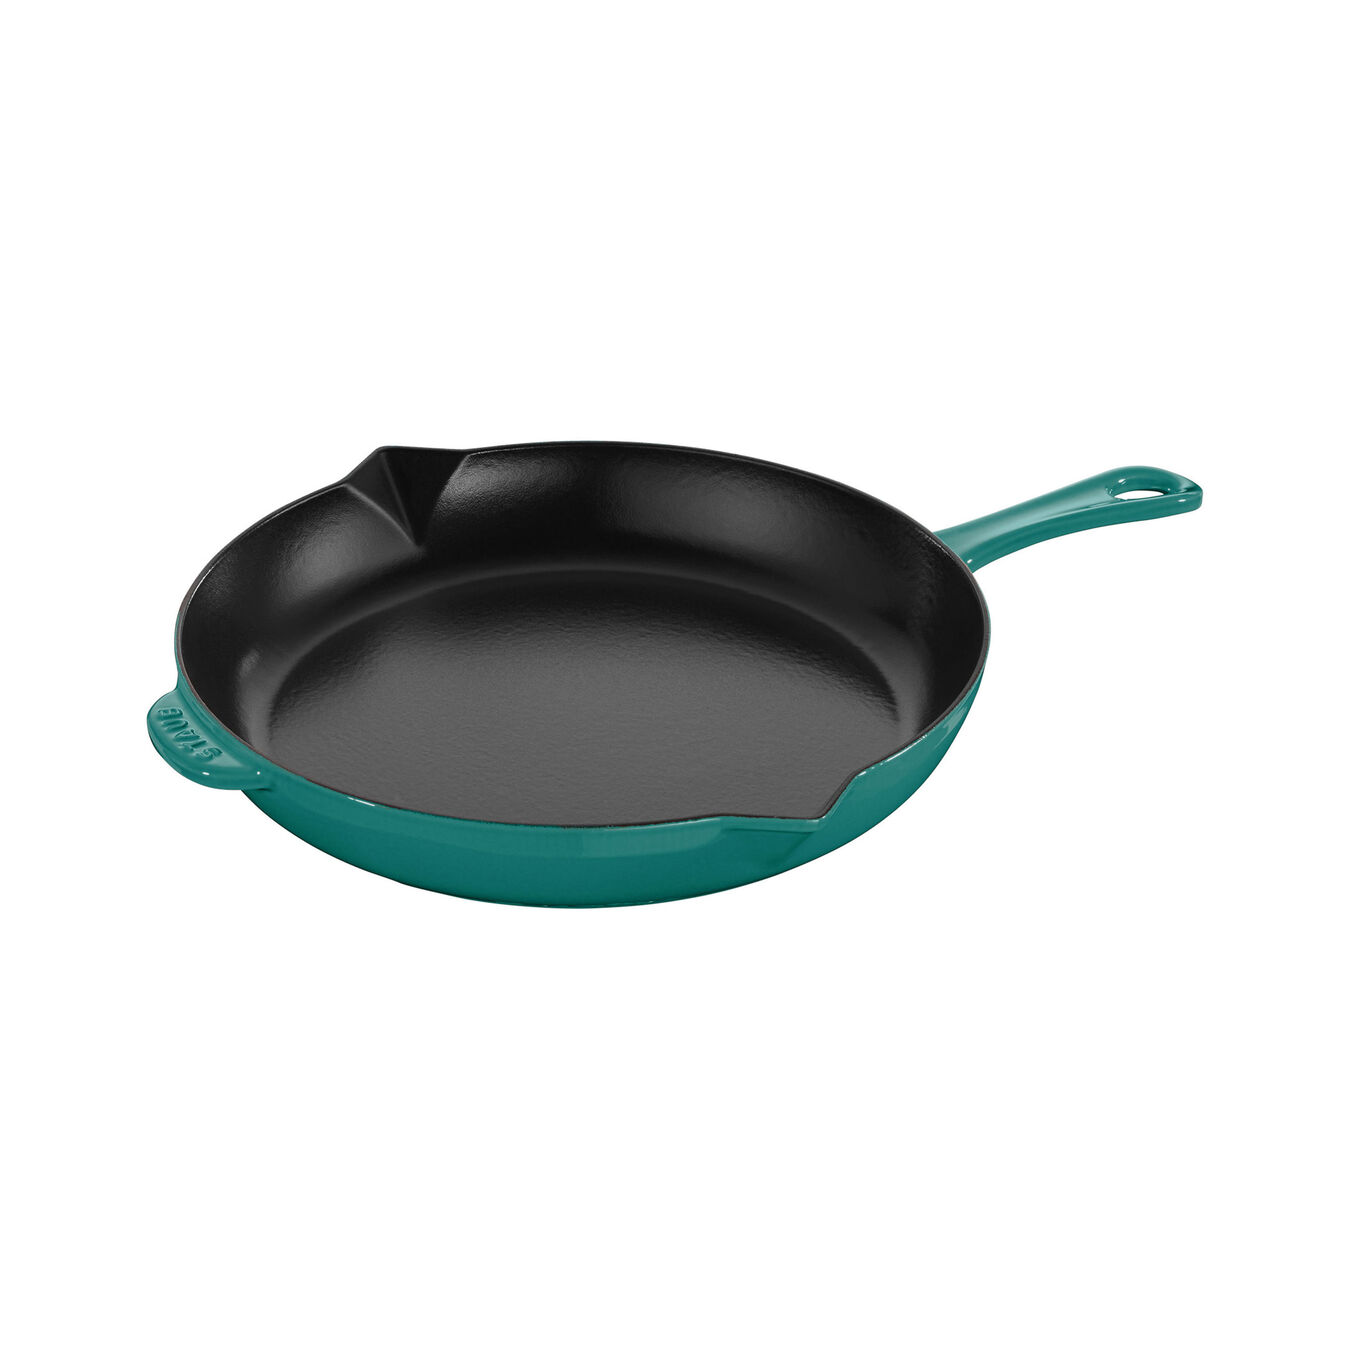 10-inch, Fry Pan, turquoise,,large 1